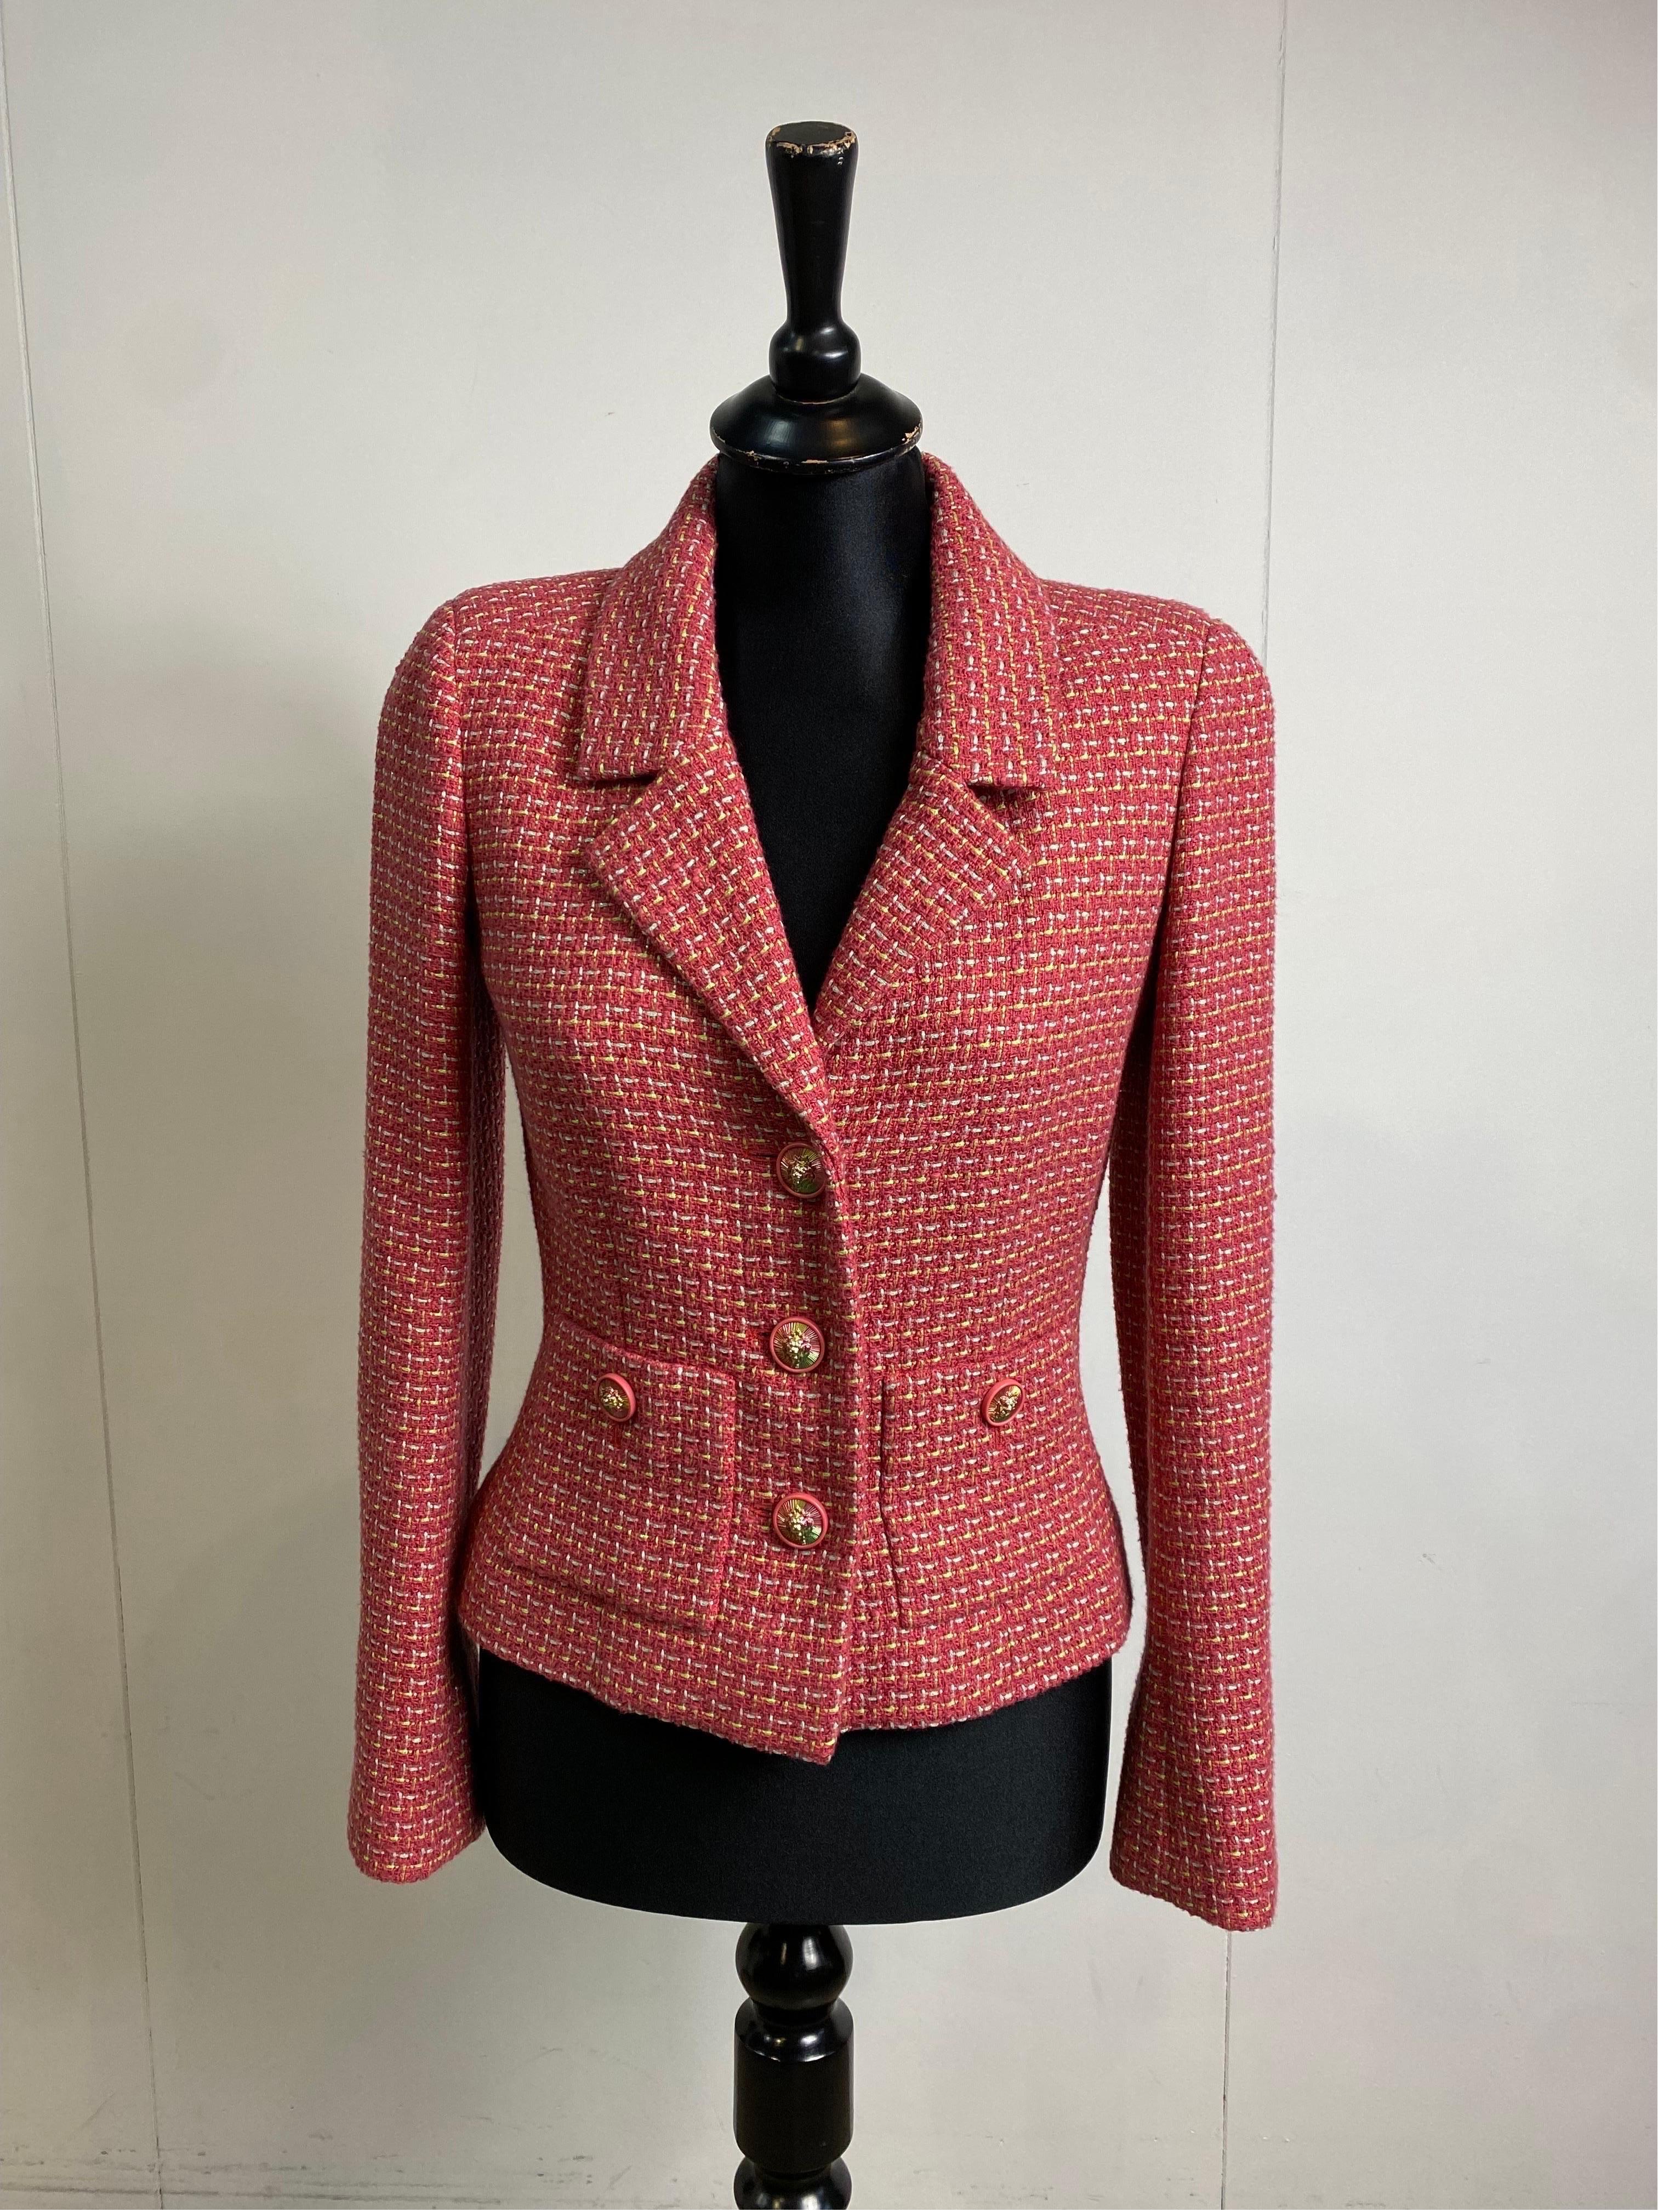 Chanel jacket.
Made of cotton, polyester and viscose. Silk lined.
Very rare and precious buttons with lion detail.
French size 34 which corresponds to an Italian 38.
Shoulders 40 cm
Bust 42 cm
Length 60 cm
Sleeve 62 cm
Excellent general condition,